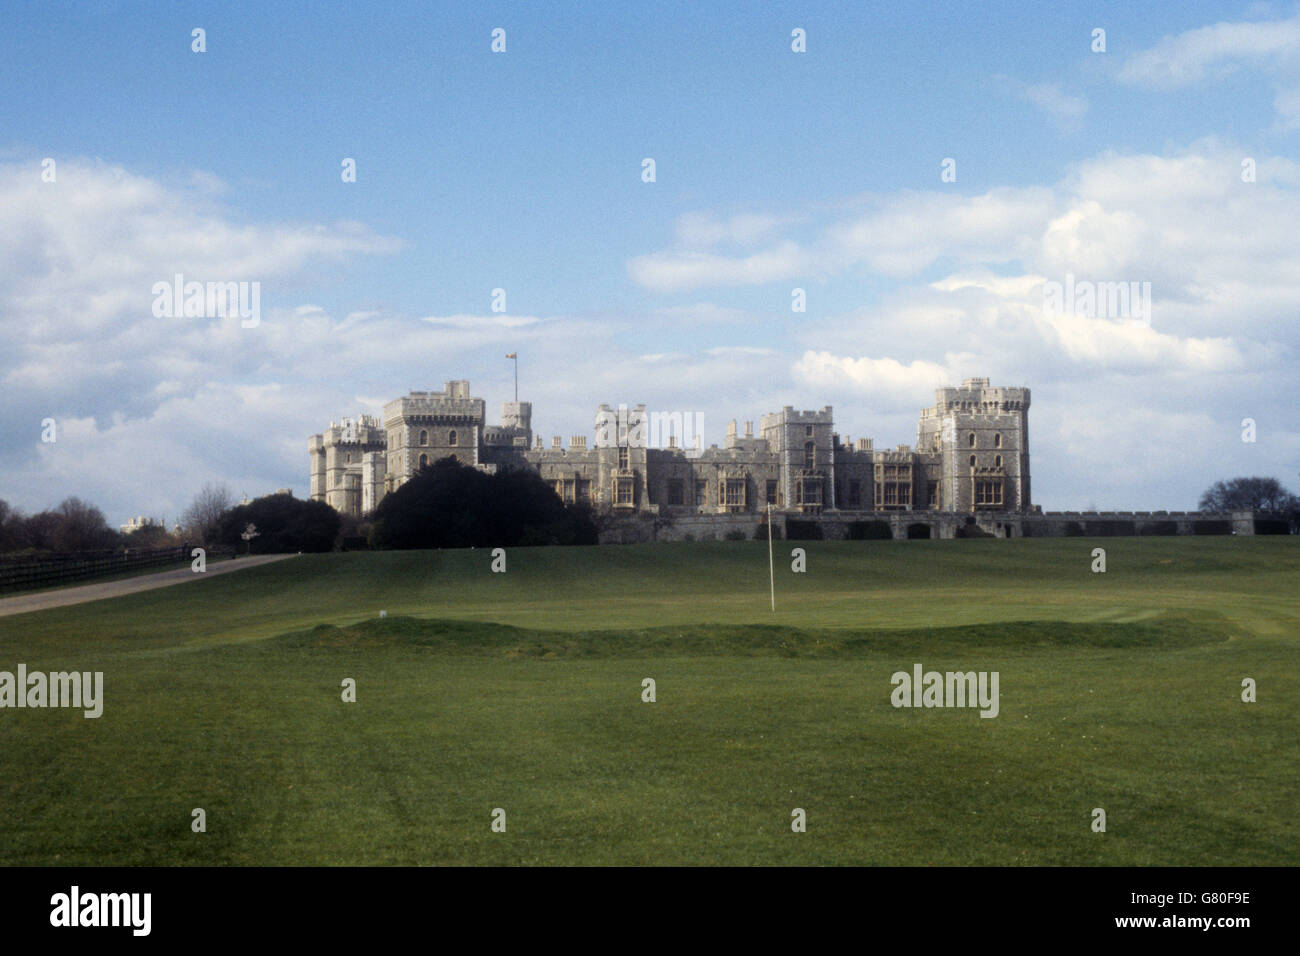 Royalty - Windsor Castle. The East Terrace of Windsor Castle, with its golf course in the foreground. Stock Photo